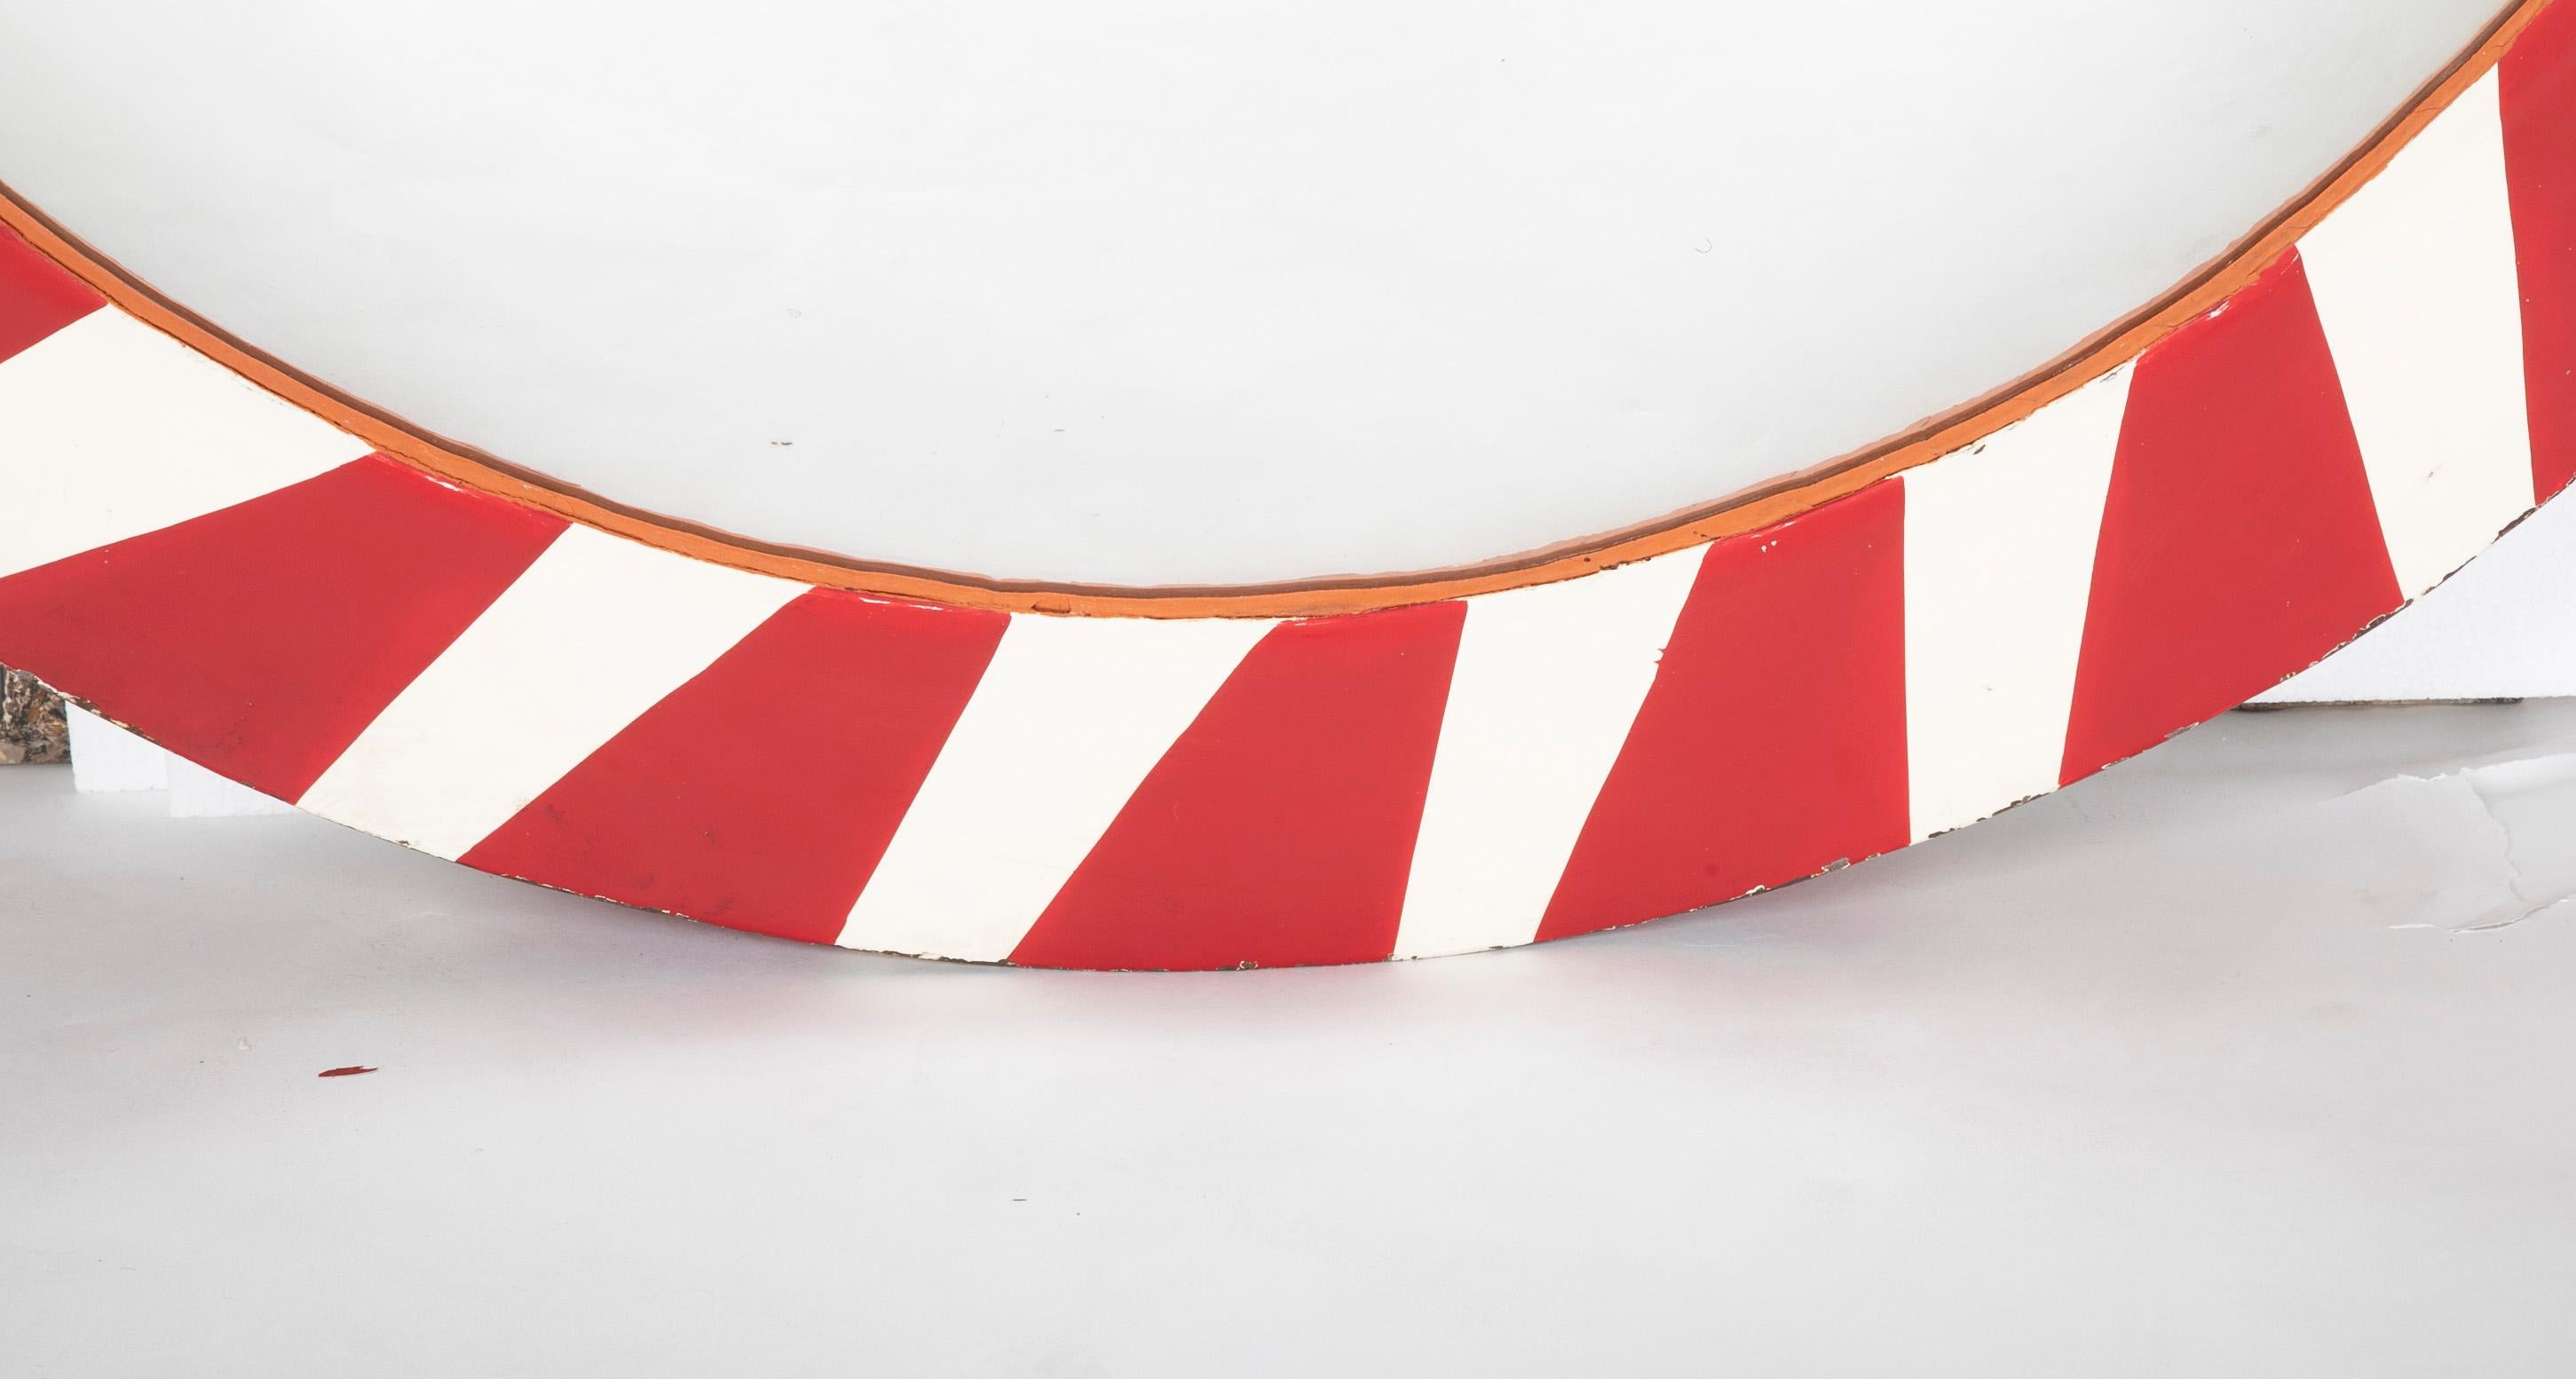 Painted Steel Convex Red and White Railroad Mirror, Large Scale